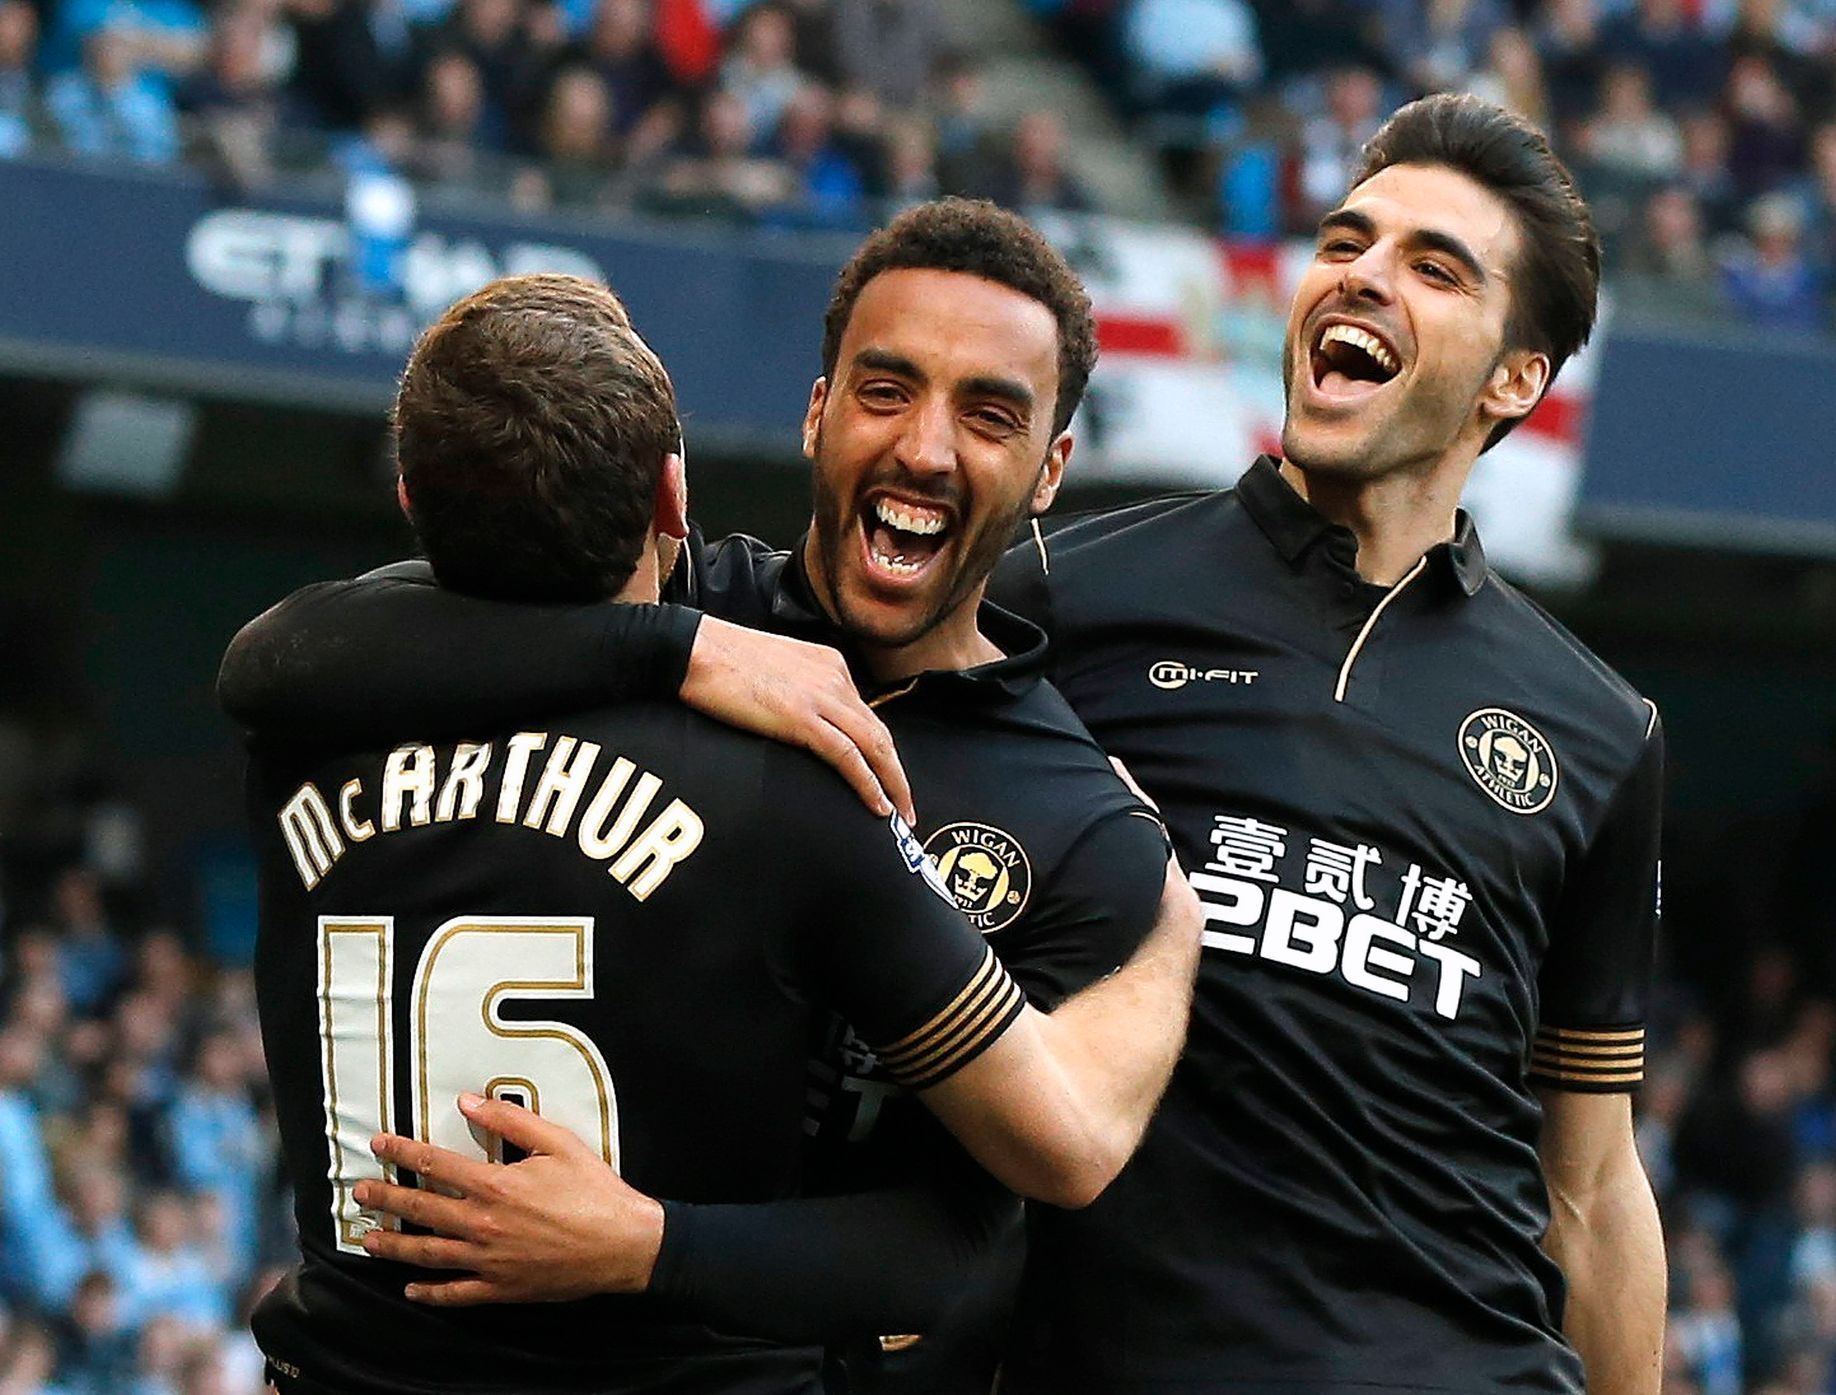 Wigan Athletic's Perch celebrates with teammates McArthur and Gomez after scoring a goal against Manchester City during their English FA Cup quarter final match in Manchester